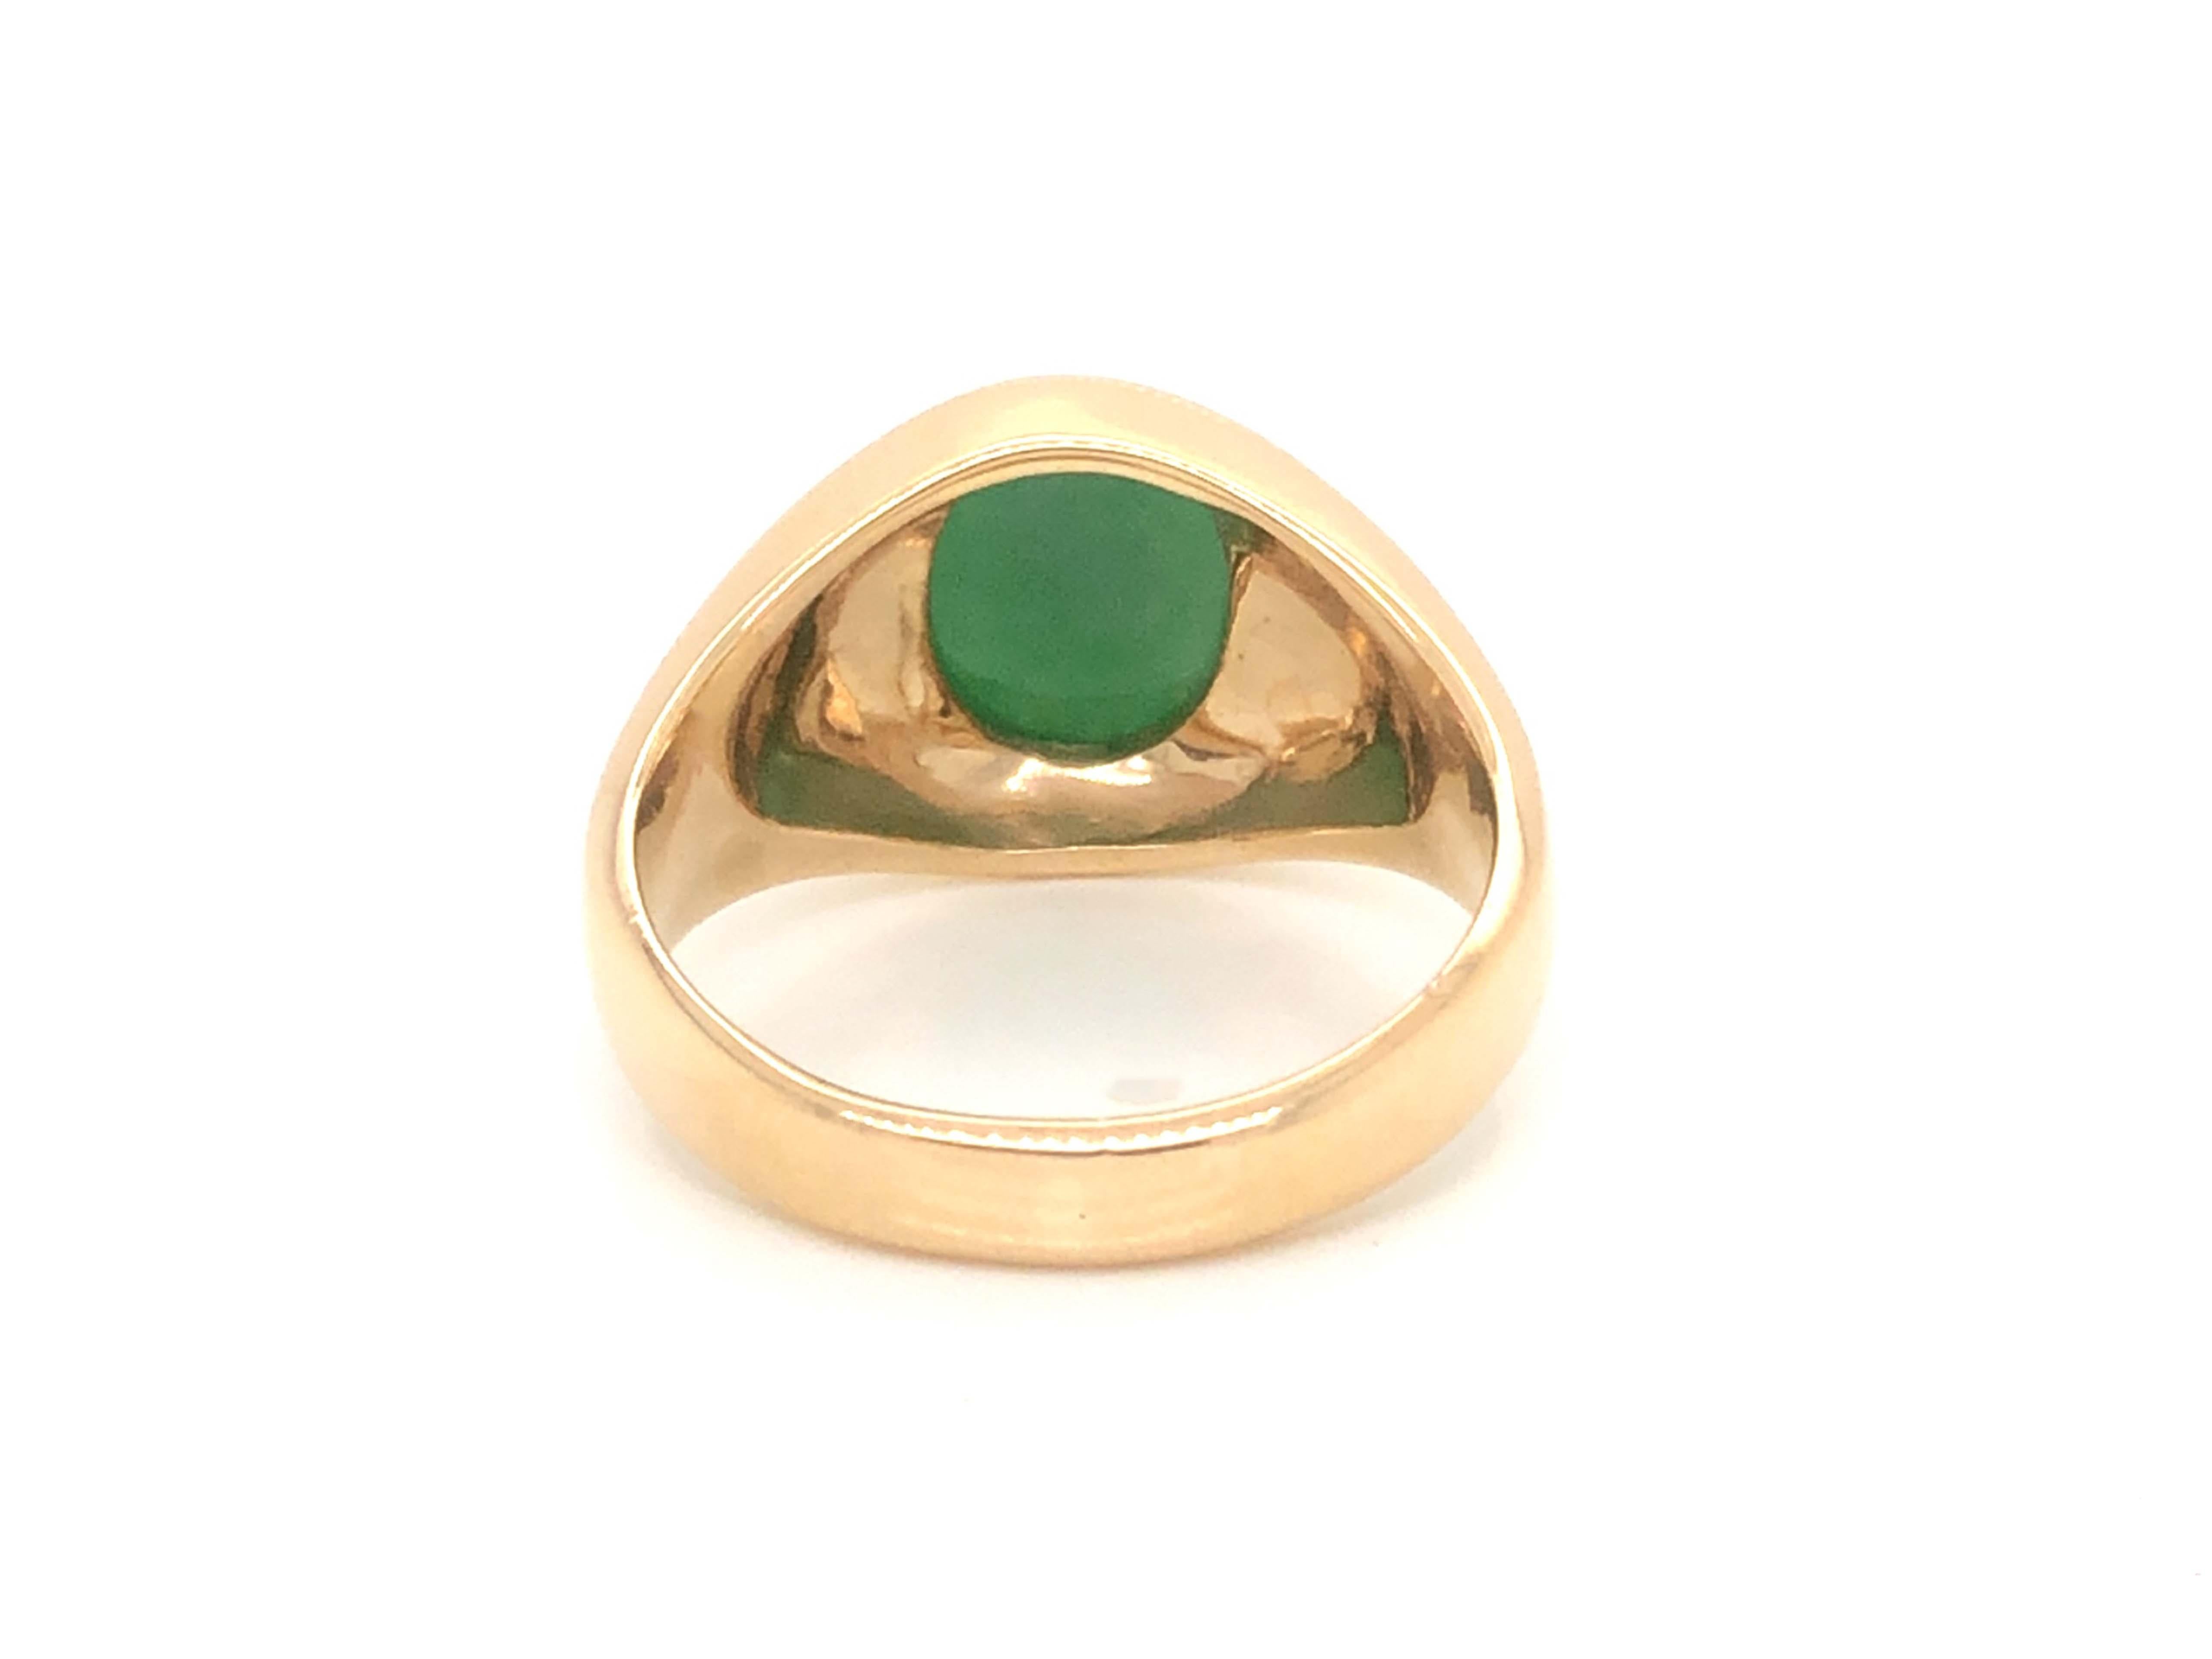 Vintage Men's Oval Cabochon Green Jade Ring, 14k Yellow Gold 1